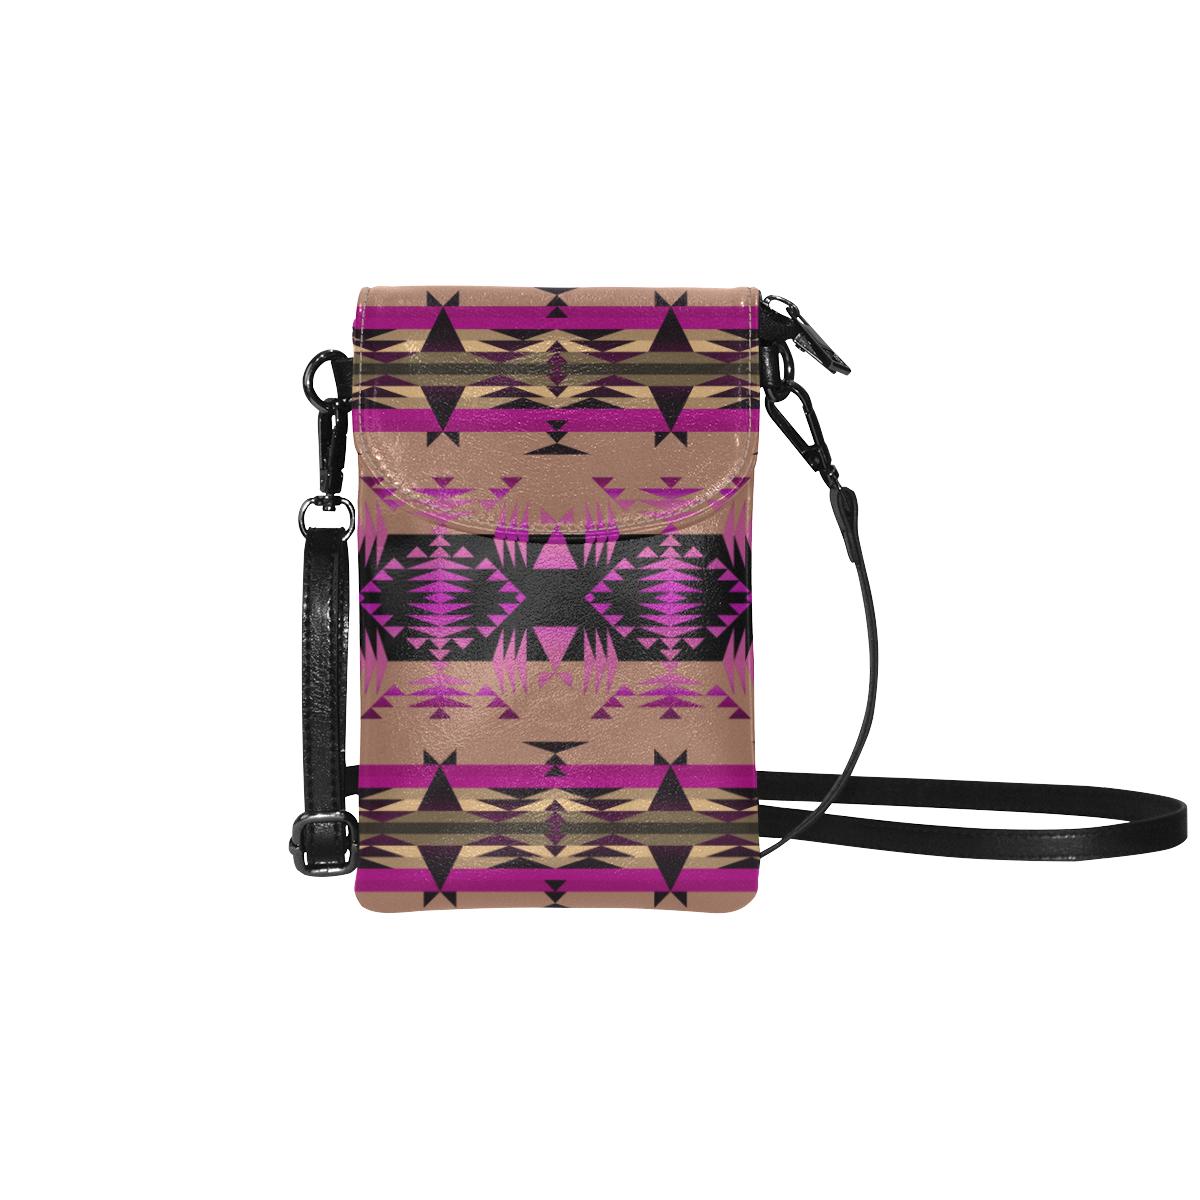 Between the Mountains Berry Small Cell Phone Purse (Model 1711) Small Cell Phone Purse (1711) e-joyer 